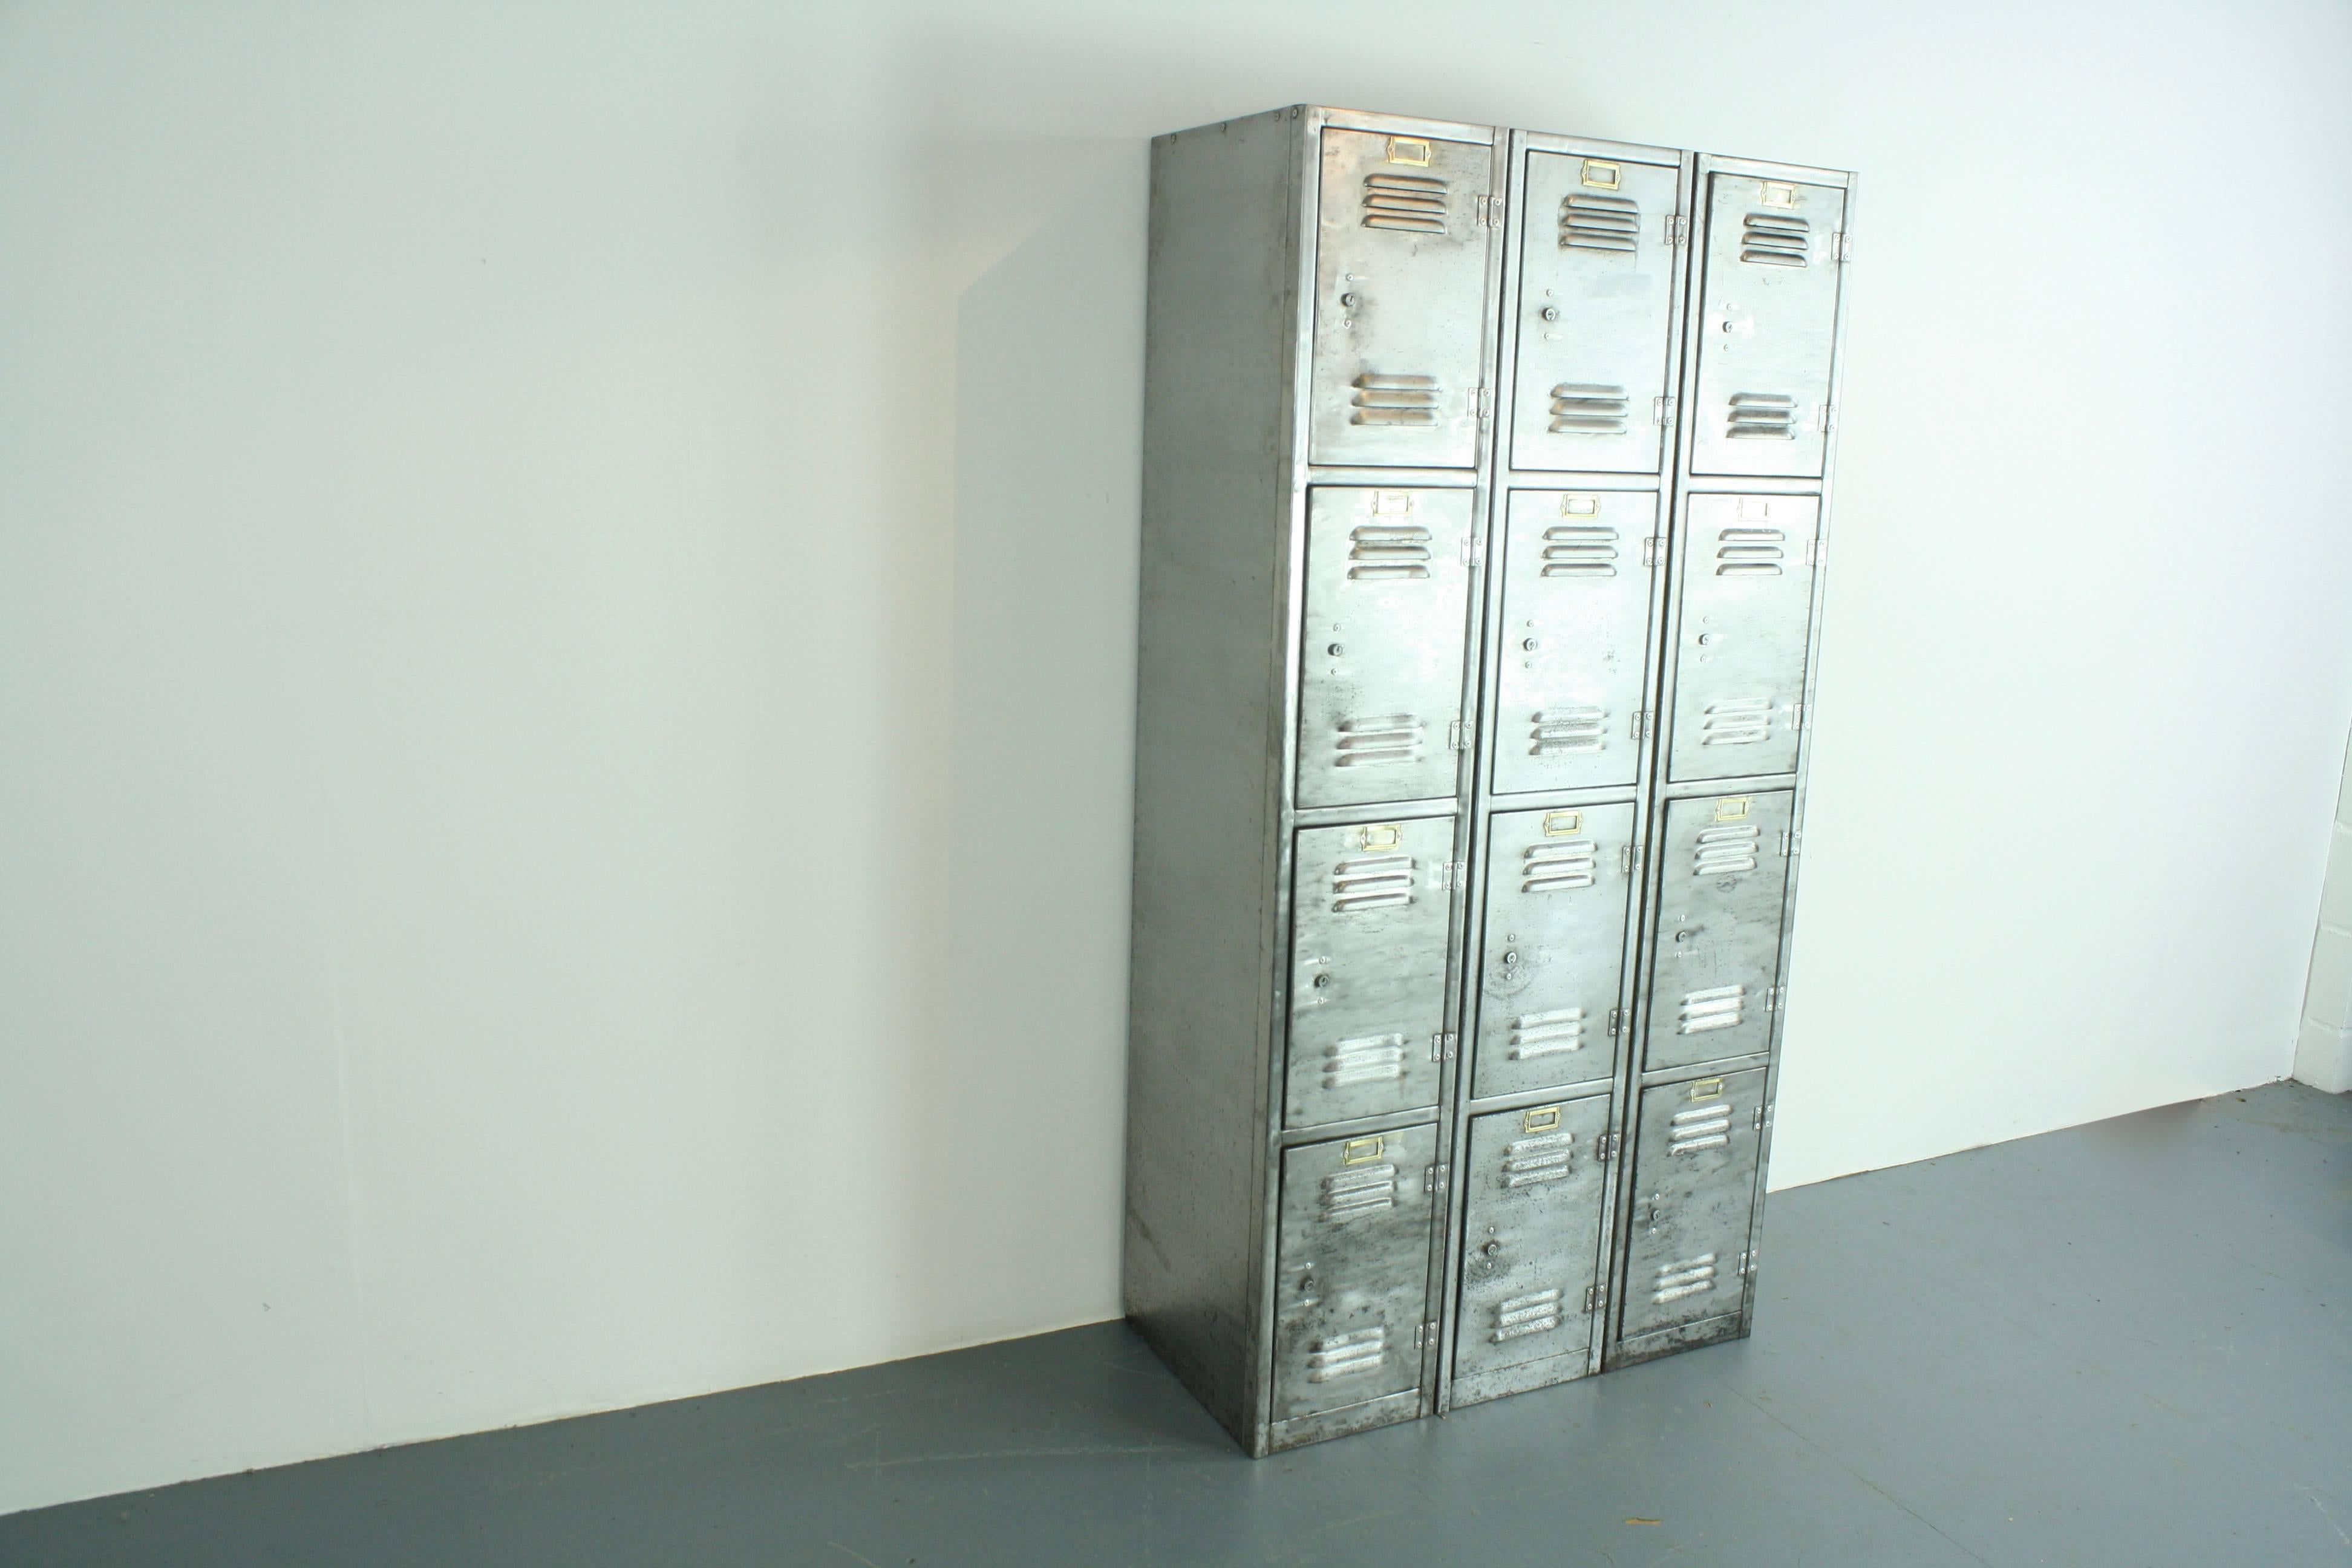 British Vintage Industrial 12 Compartment Stripped and Polished Steel School Locker